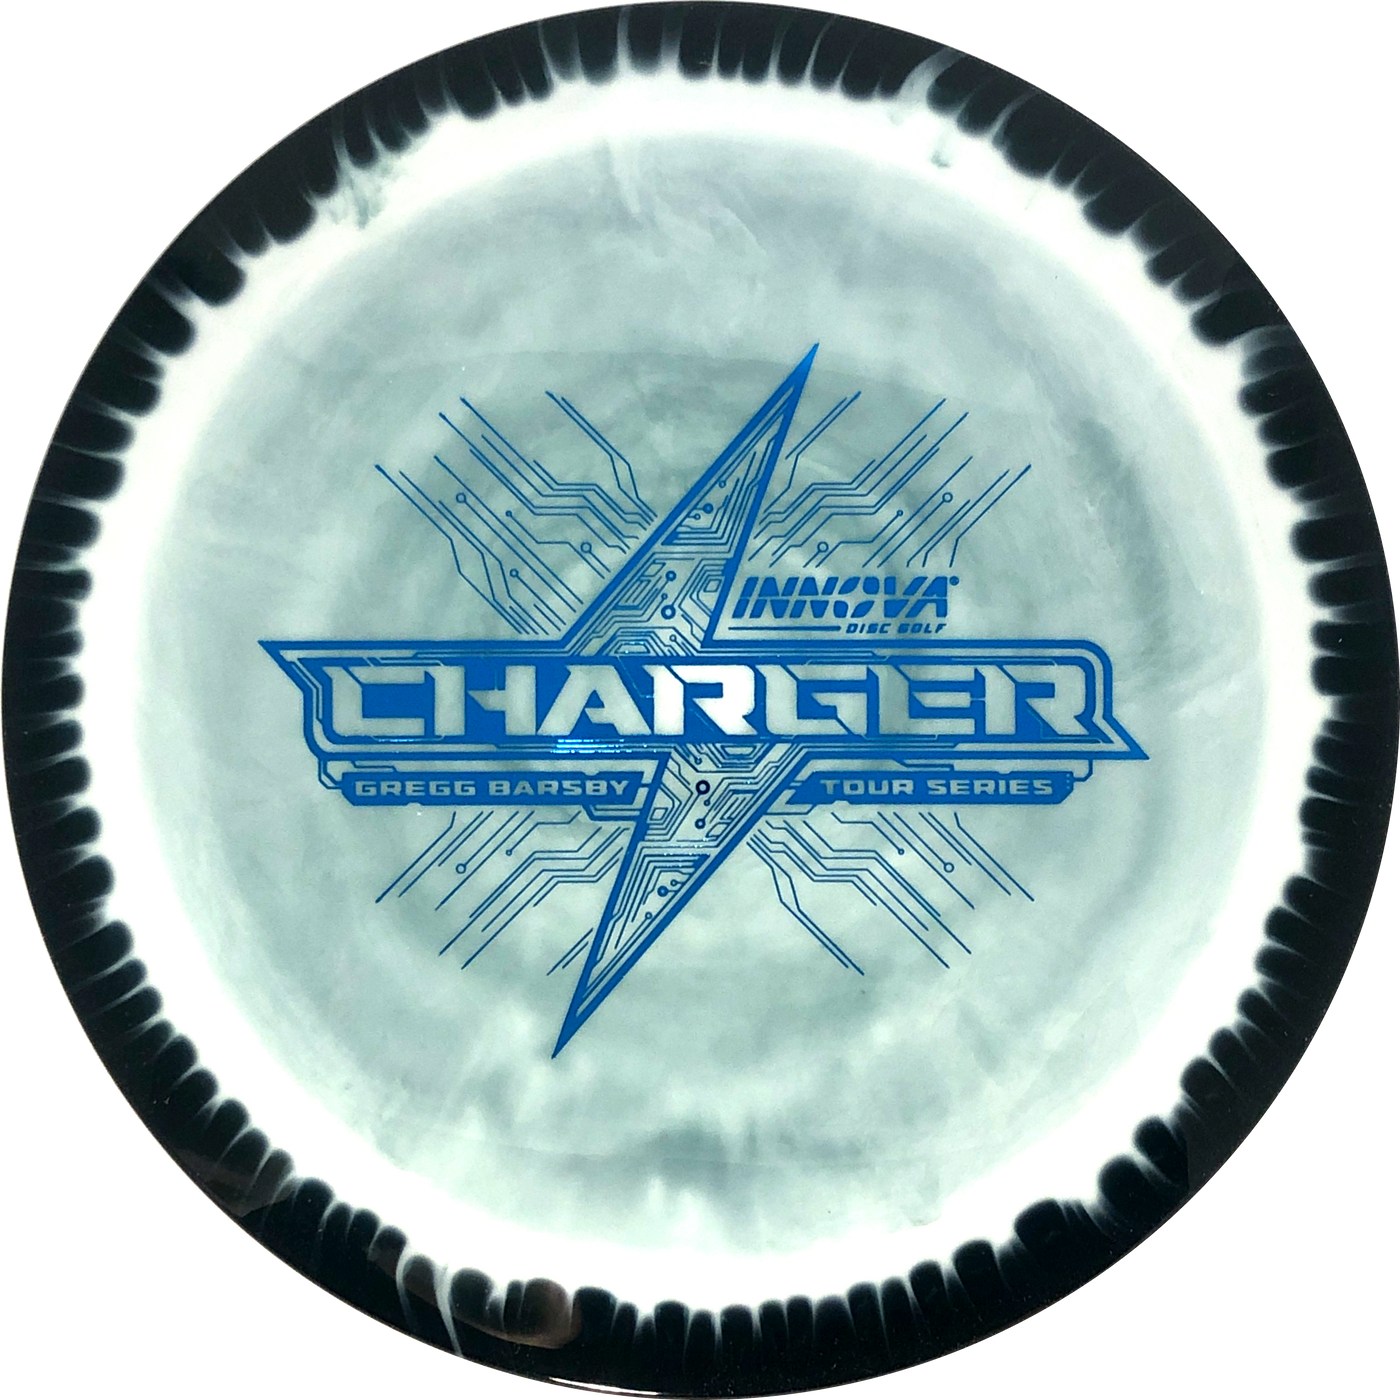 Halo Star Gregg Barsby Charger